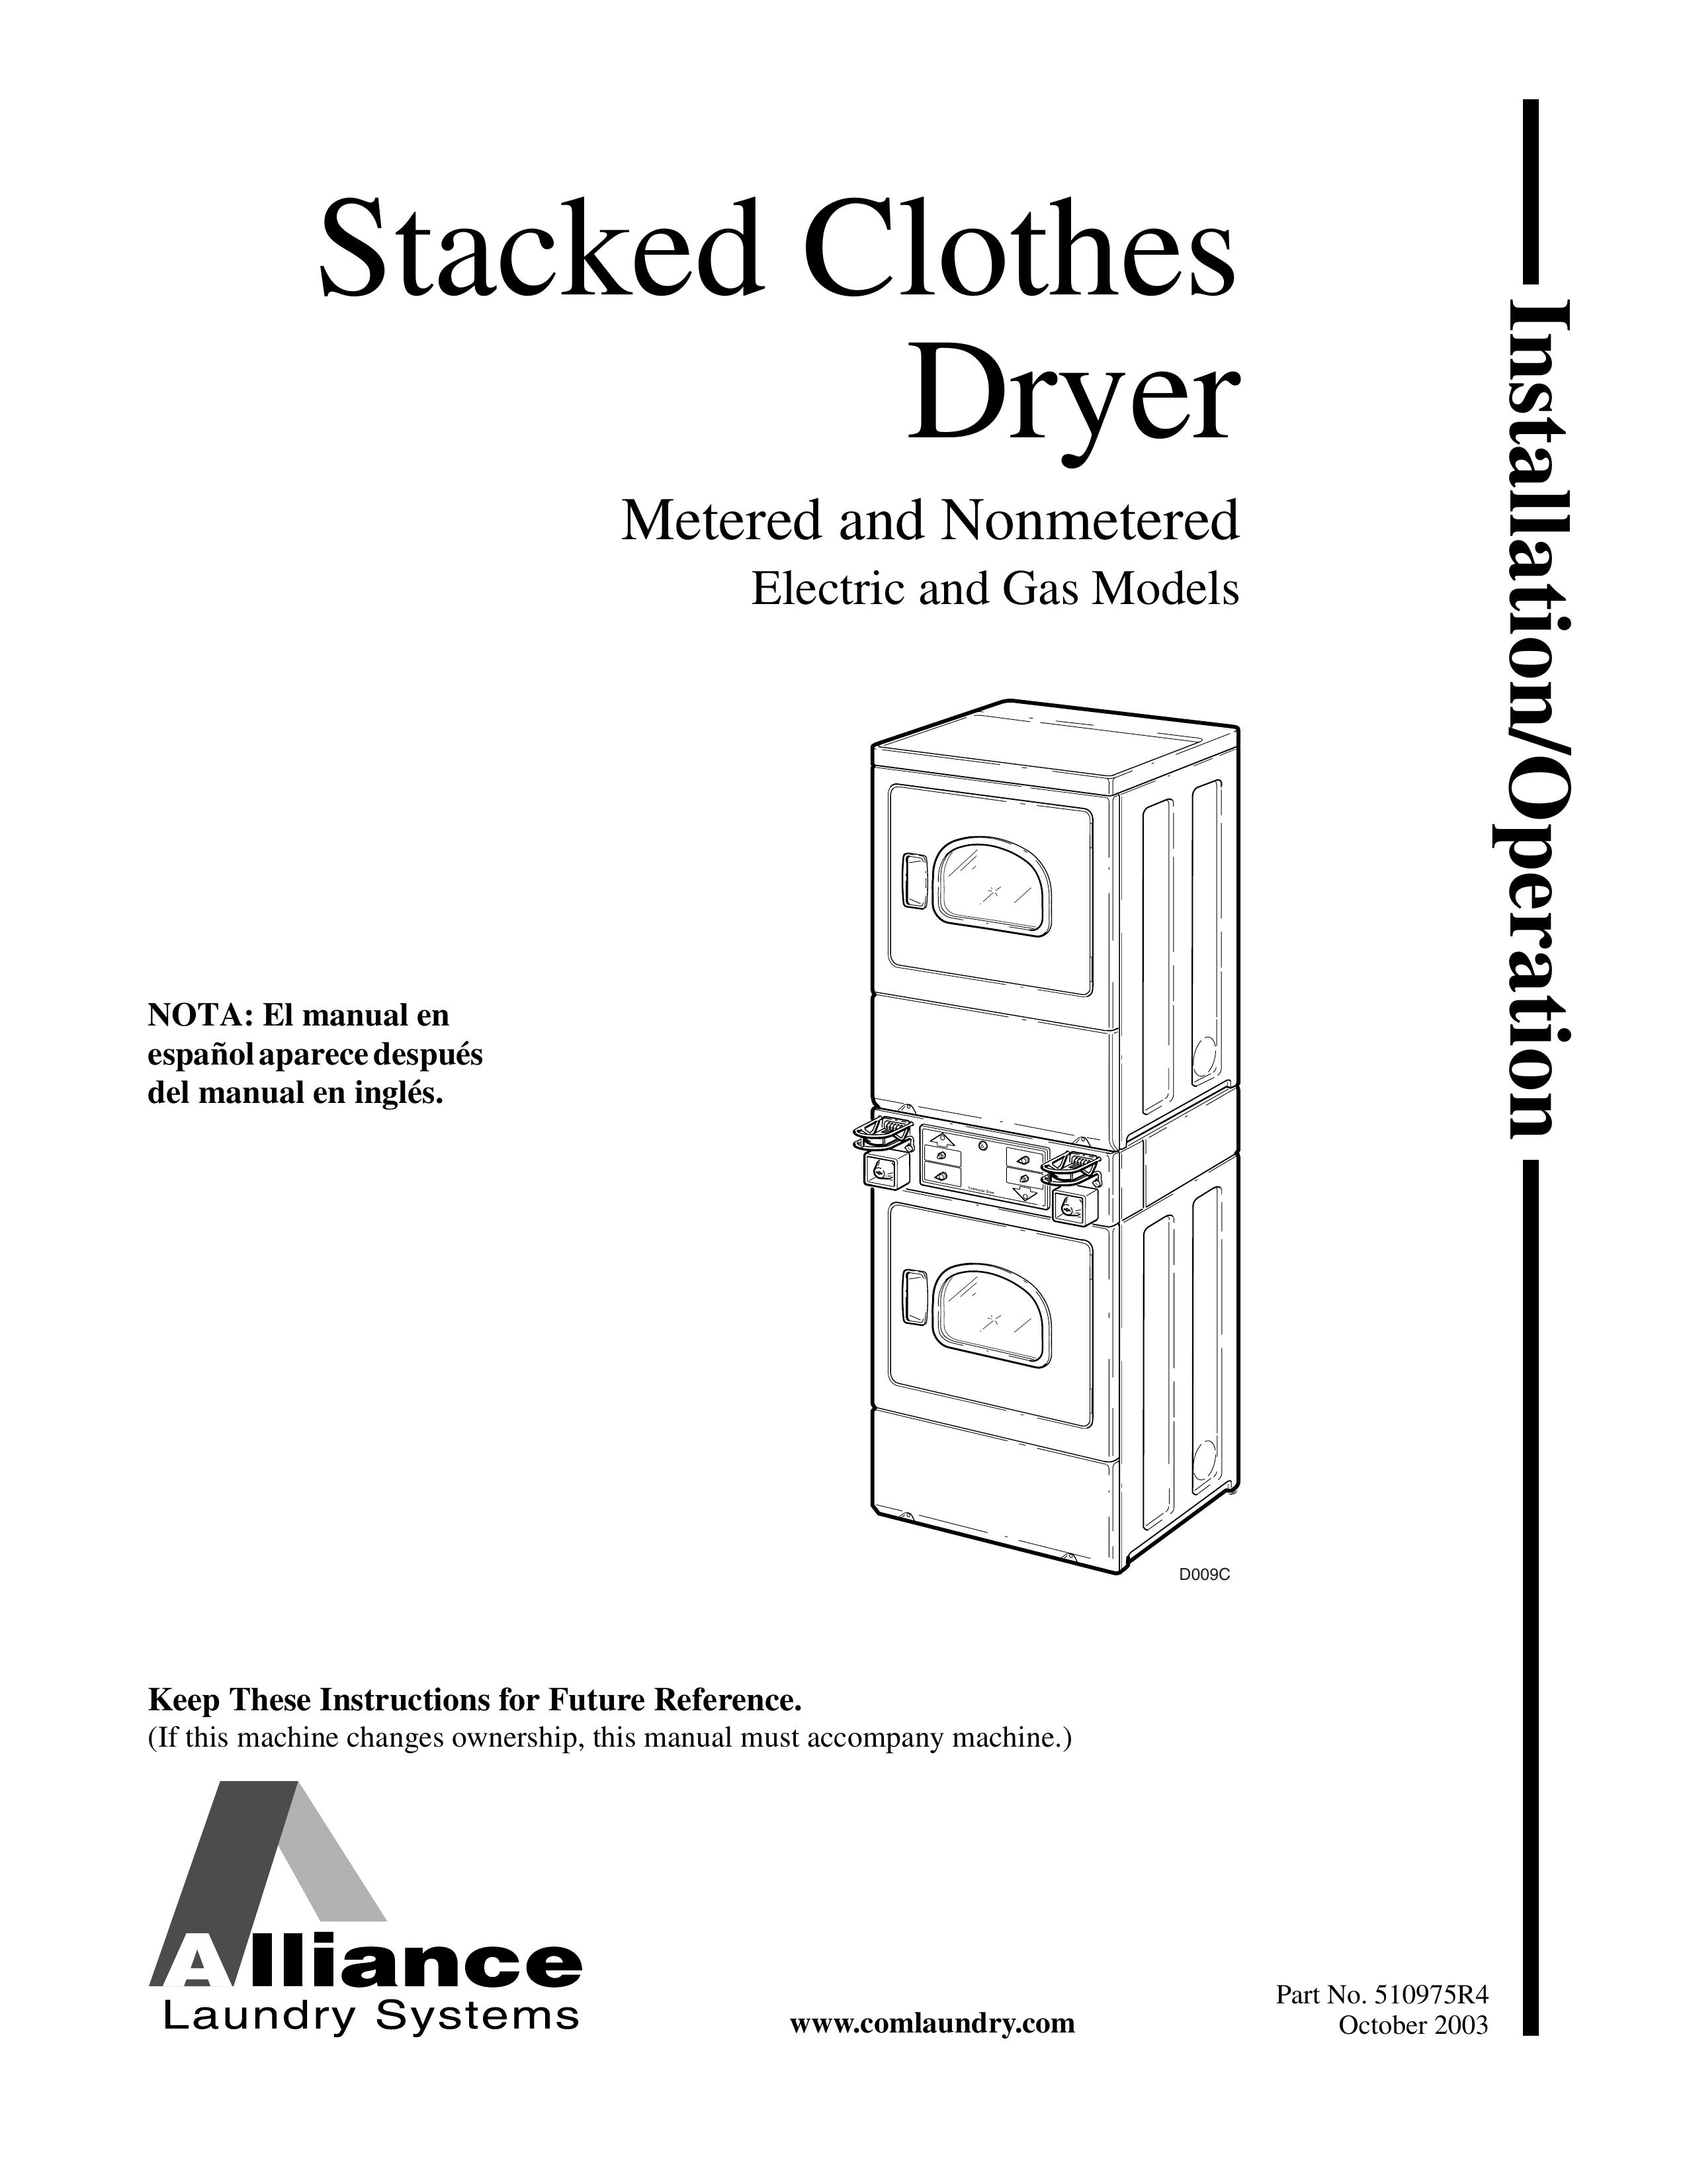 Alliance Laundry Systems Stacked Clothes Dryer Washer/Dryer User Manual